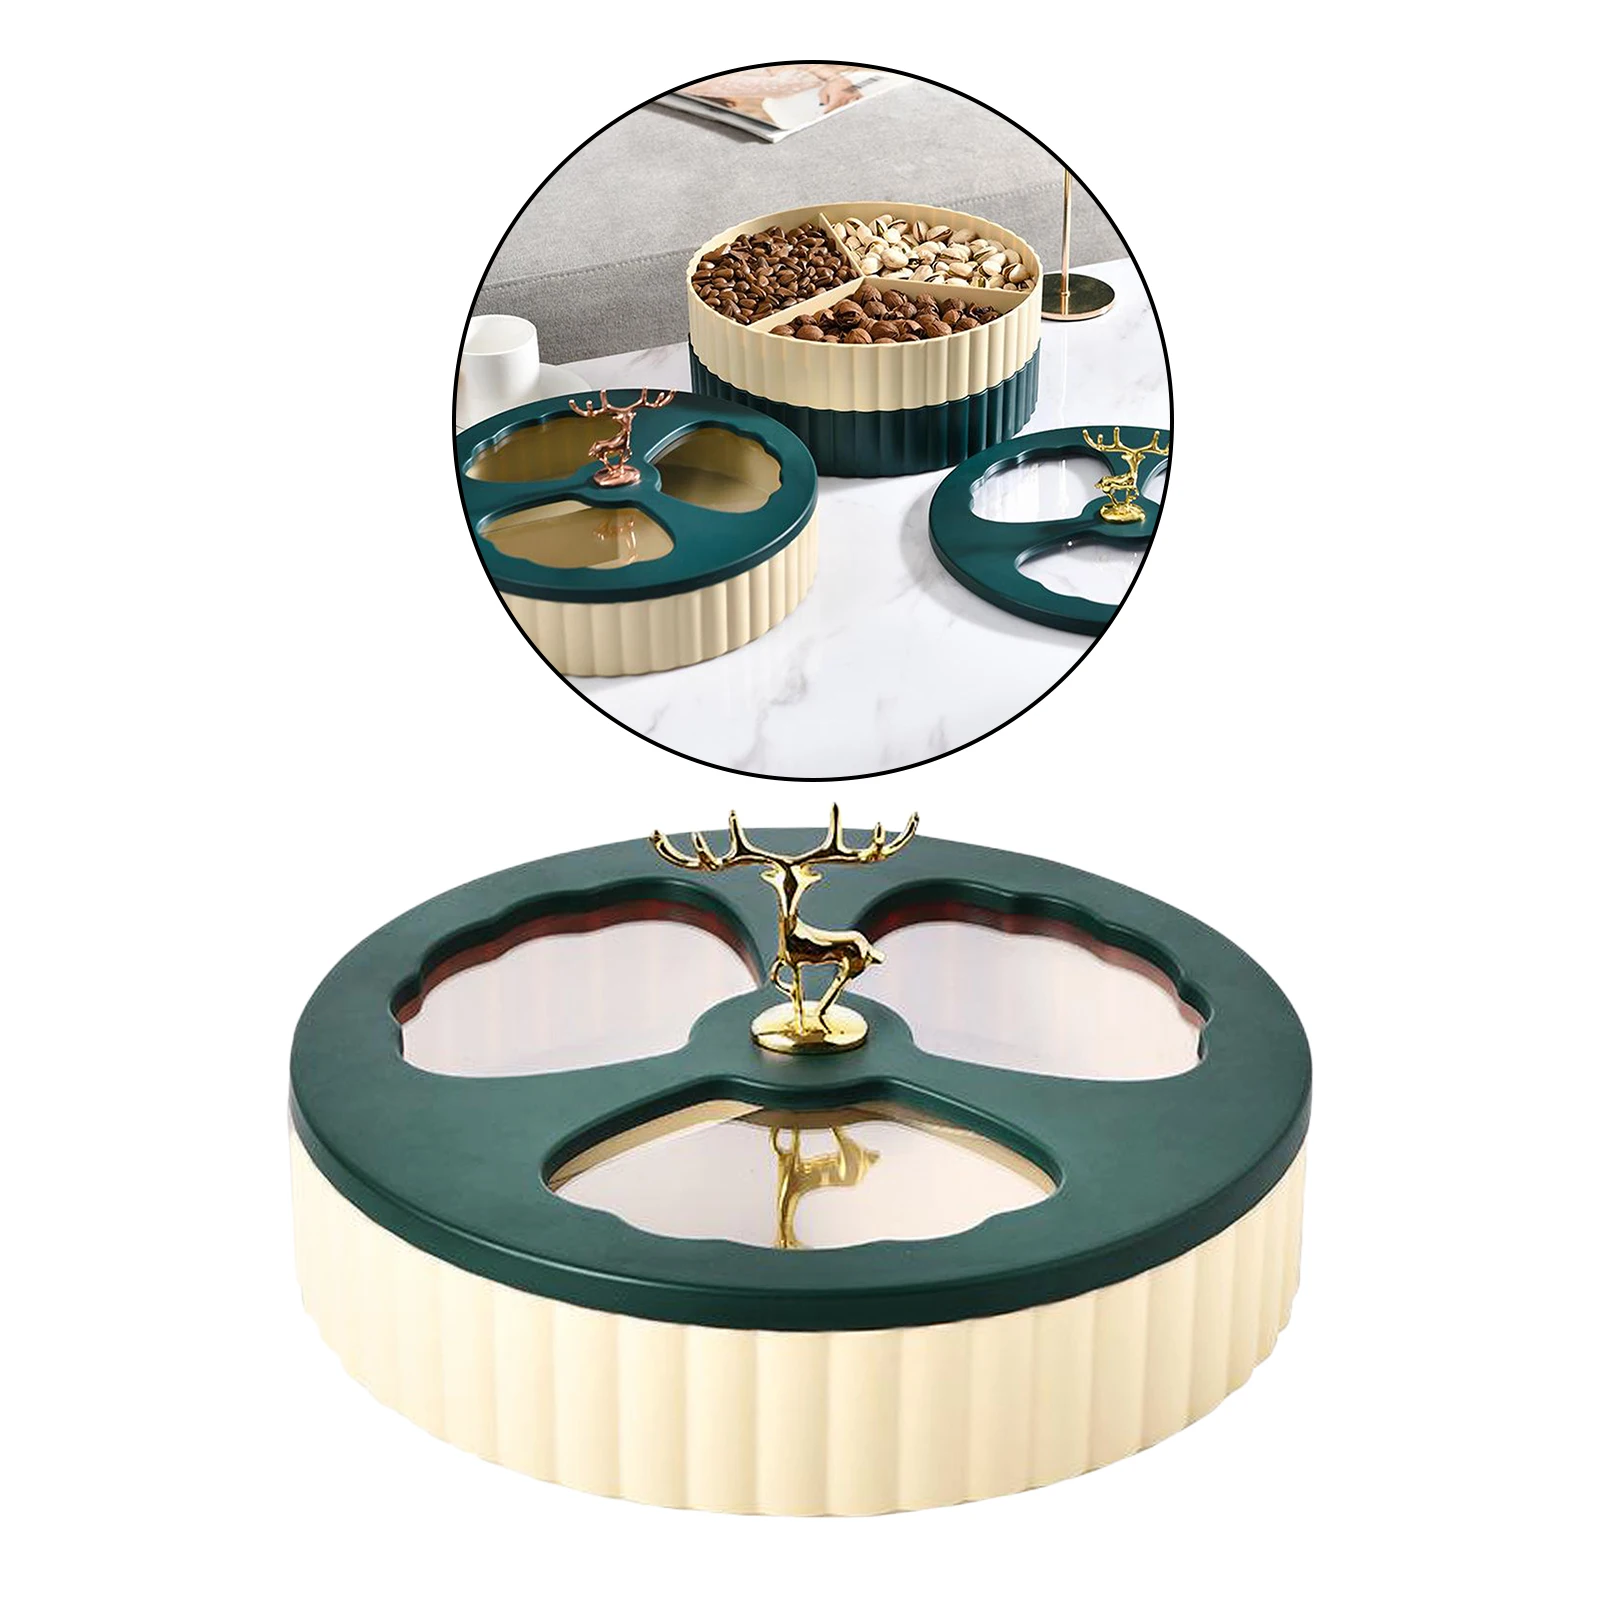 Rotating Snack Platter? 3 Sectional Candy Food Storage Box Organizer Nut